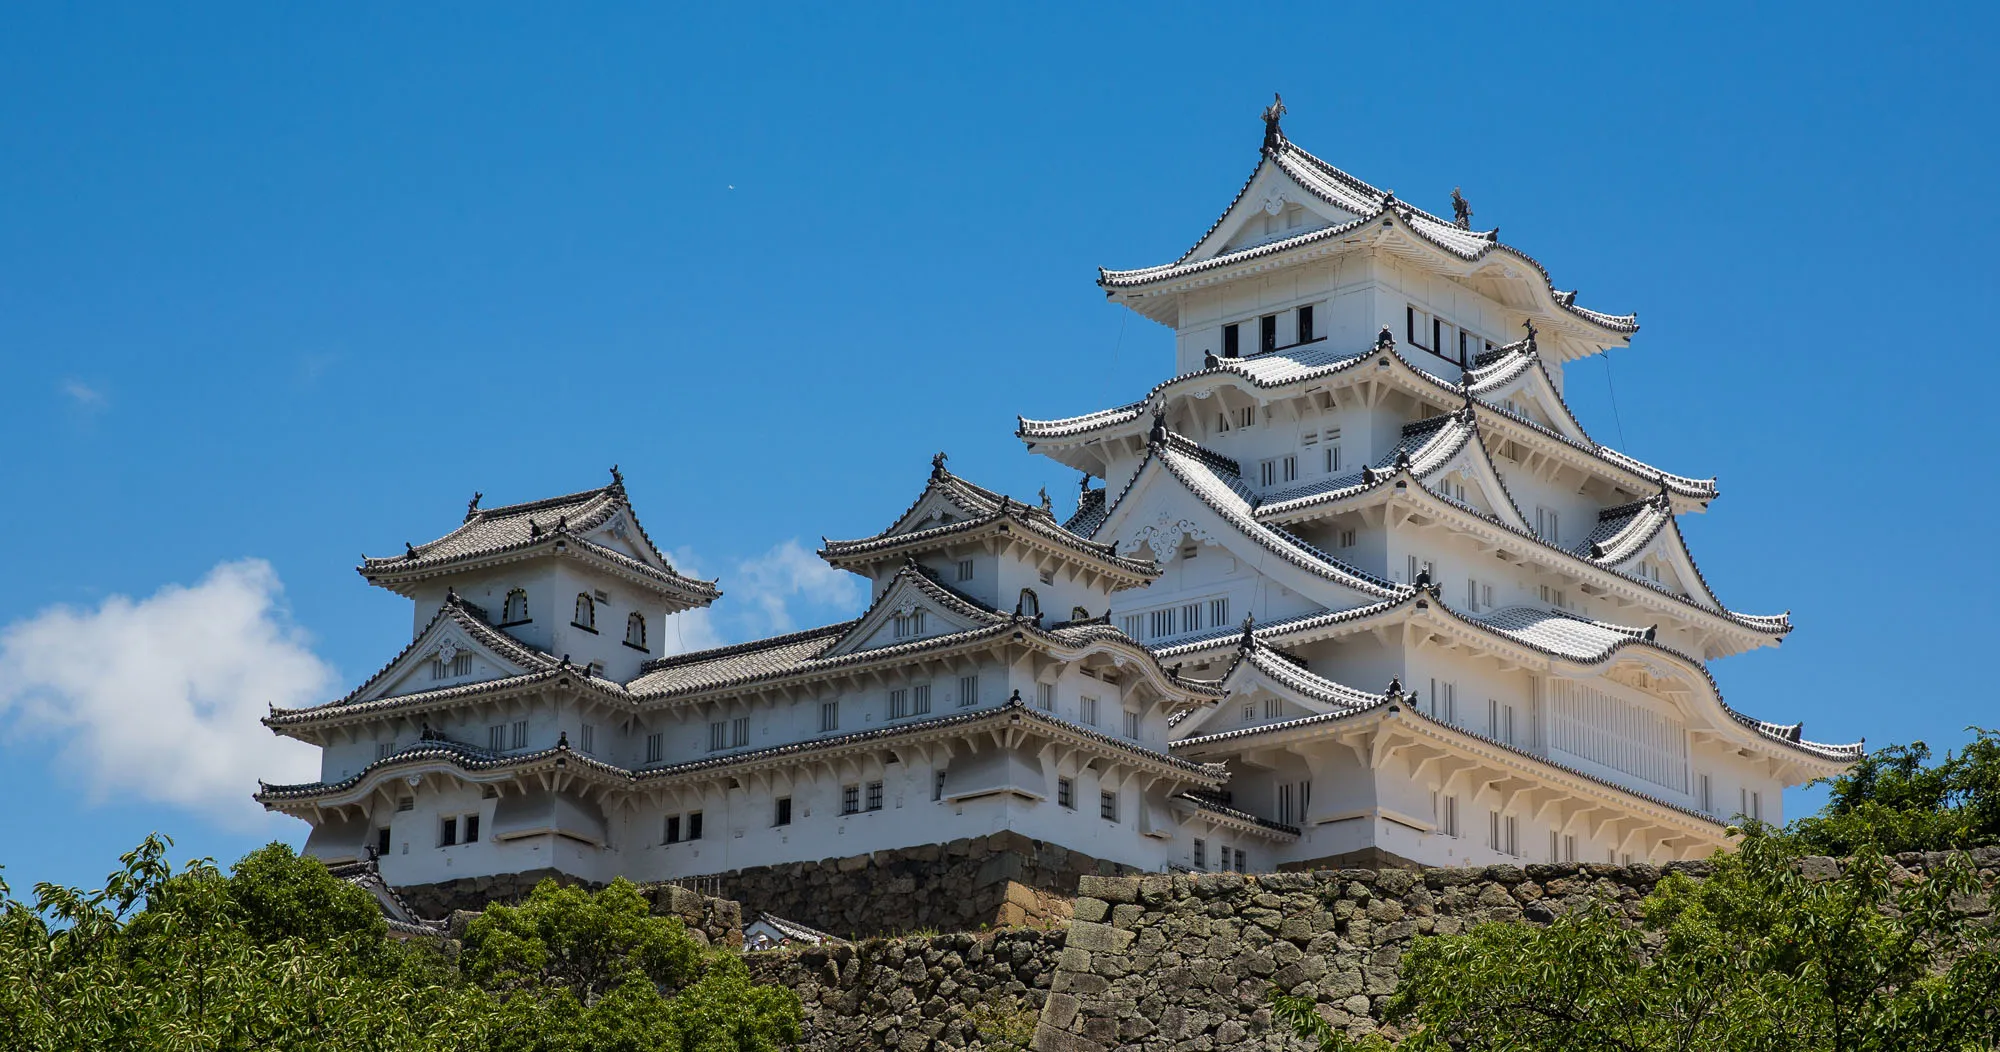 Featured image for “How to Plan a Himeji Castle Day Trip from Kyoto or Osaka”